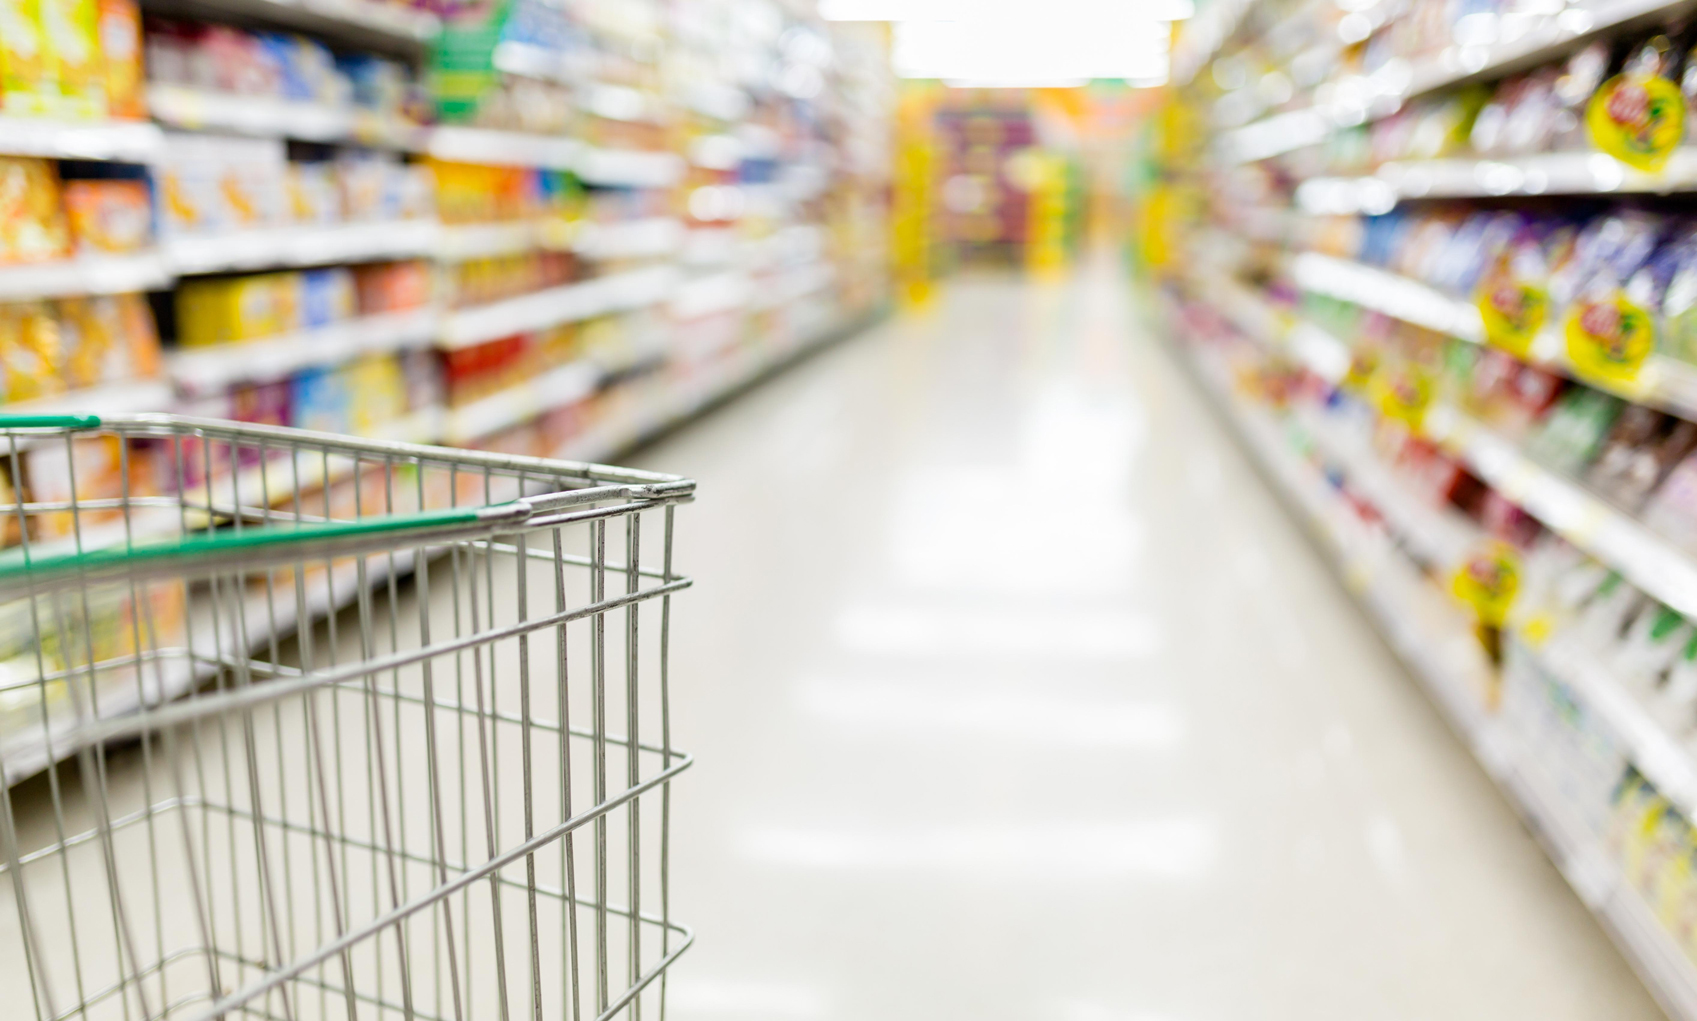 Shopper Marketing, Could Shelf Execution Become a Key Cost of Living Battle Ground?